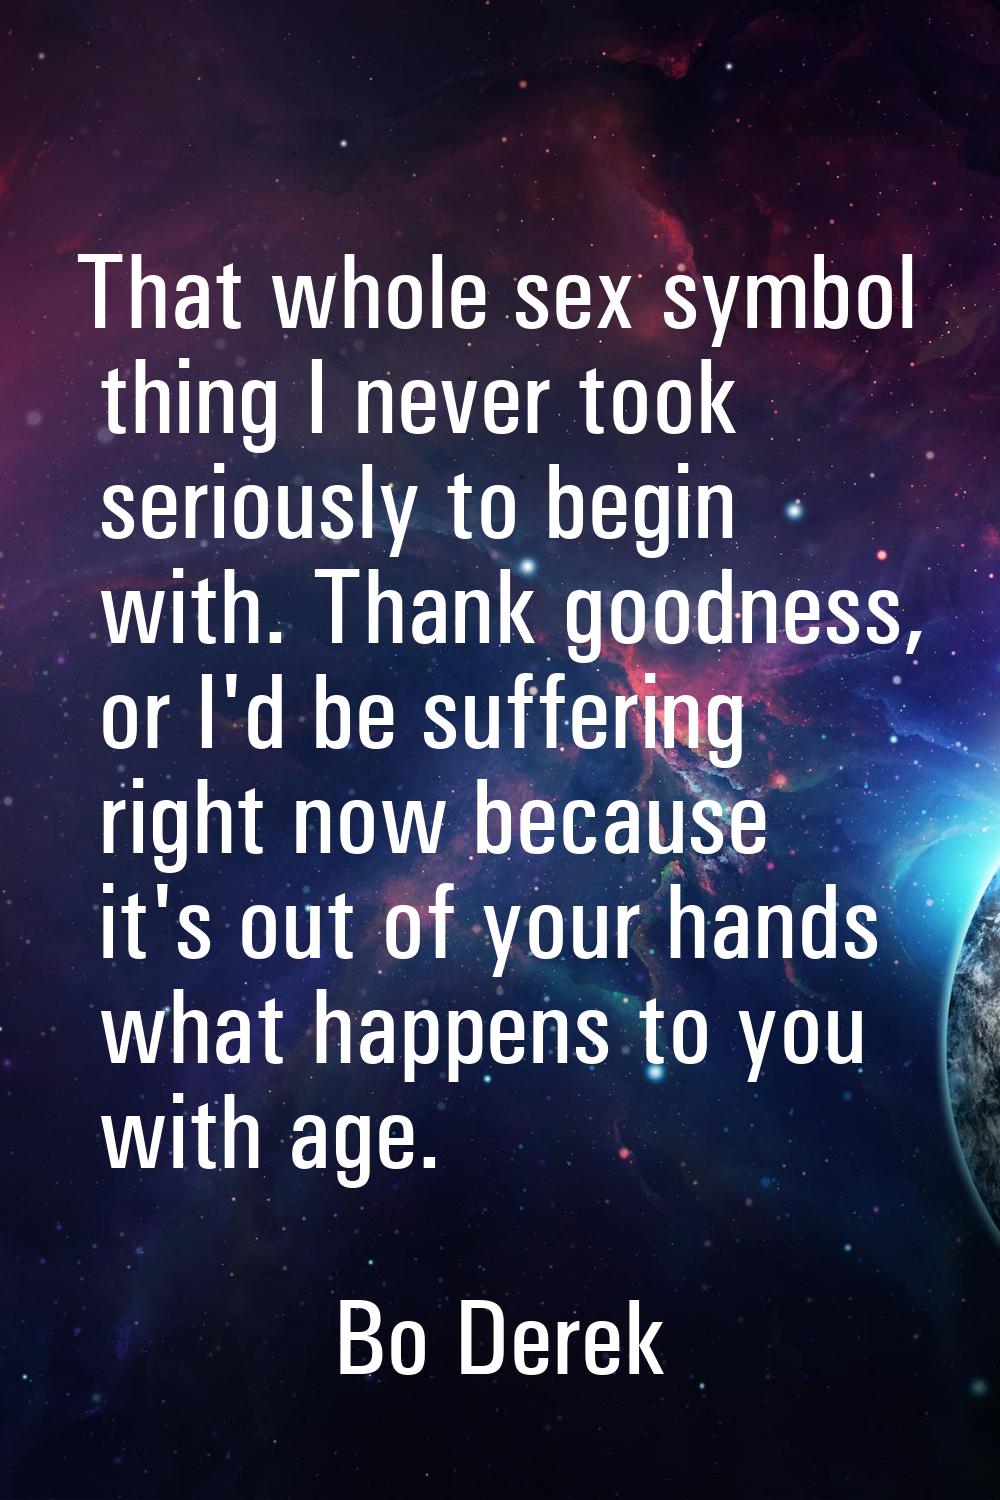 That whole sex symbol thing I never took seriously to begin with. Thank goodness, or I'd be sufferi